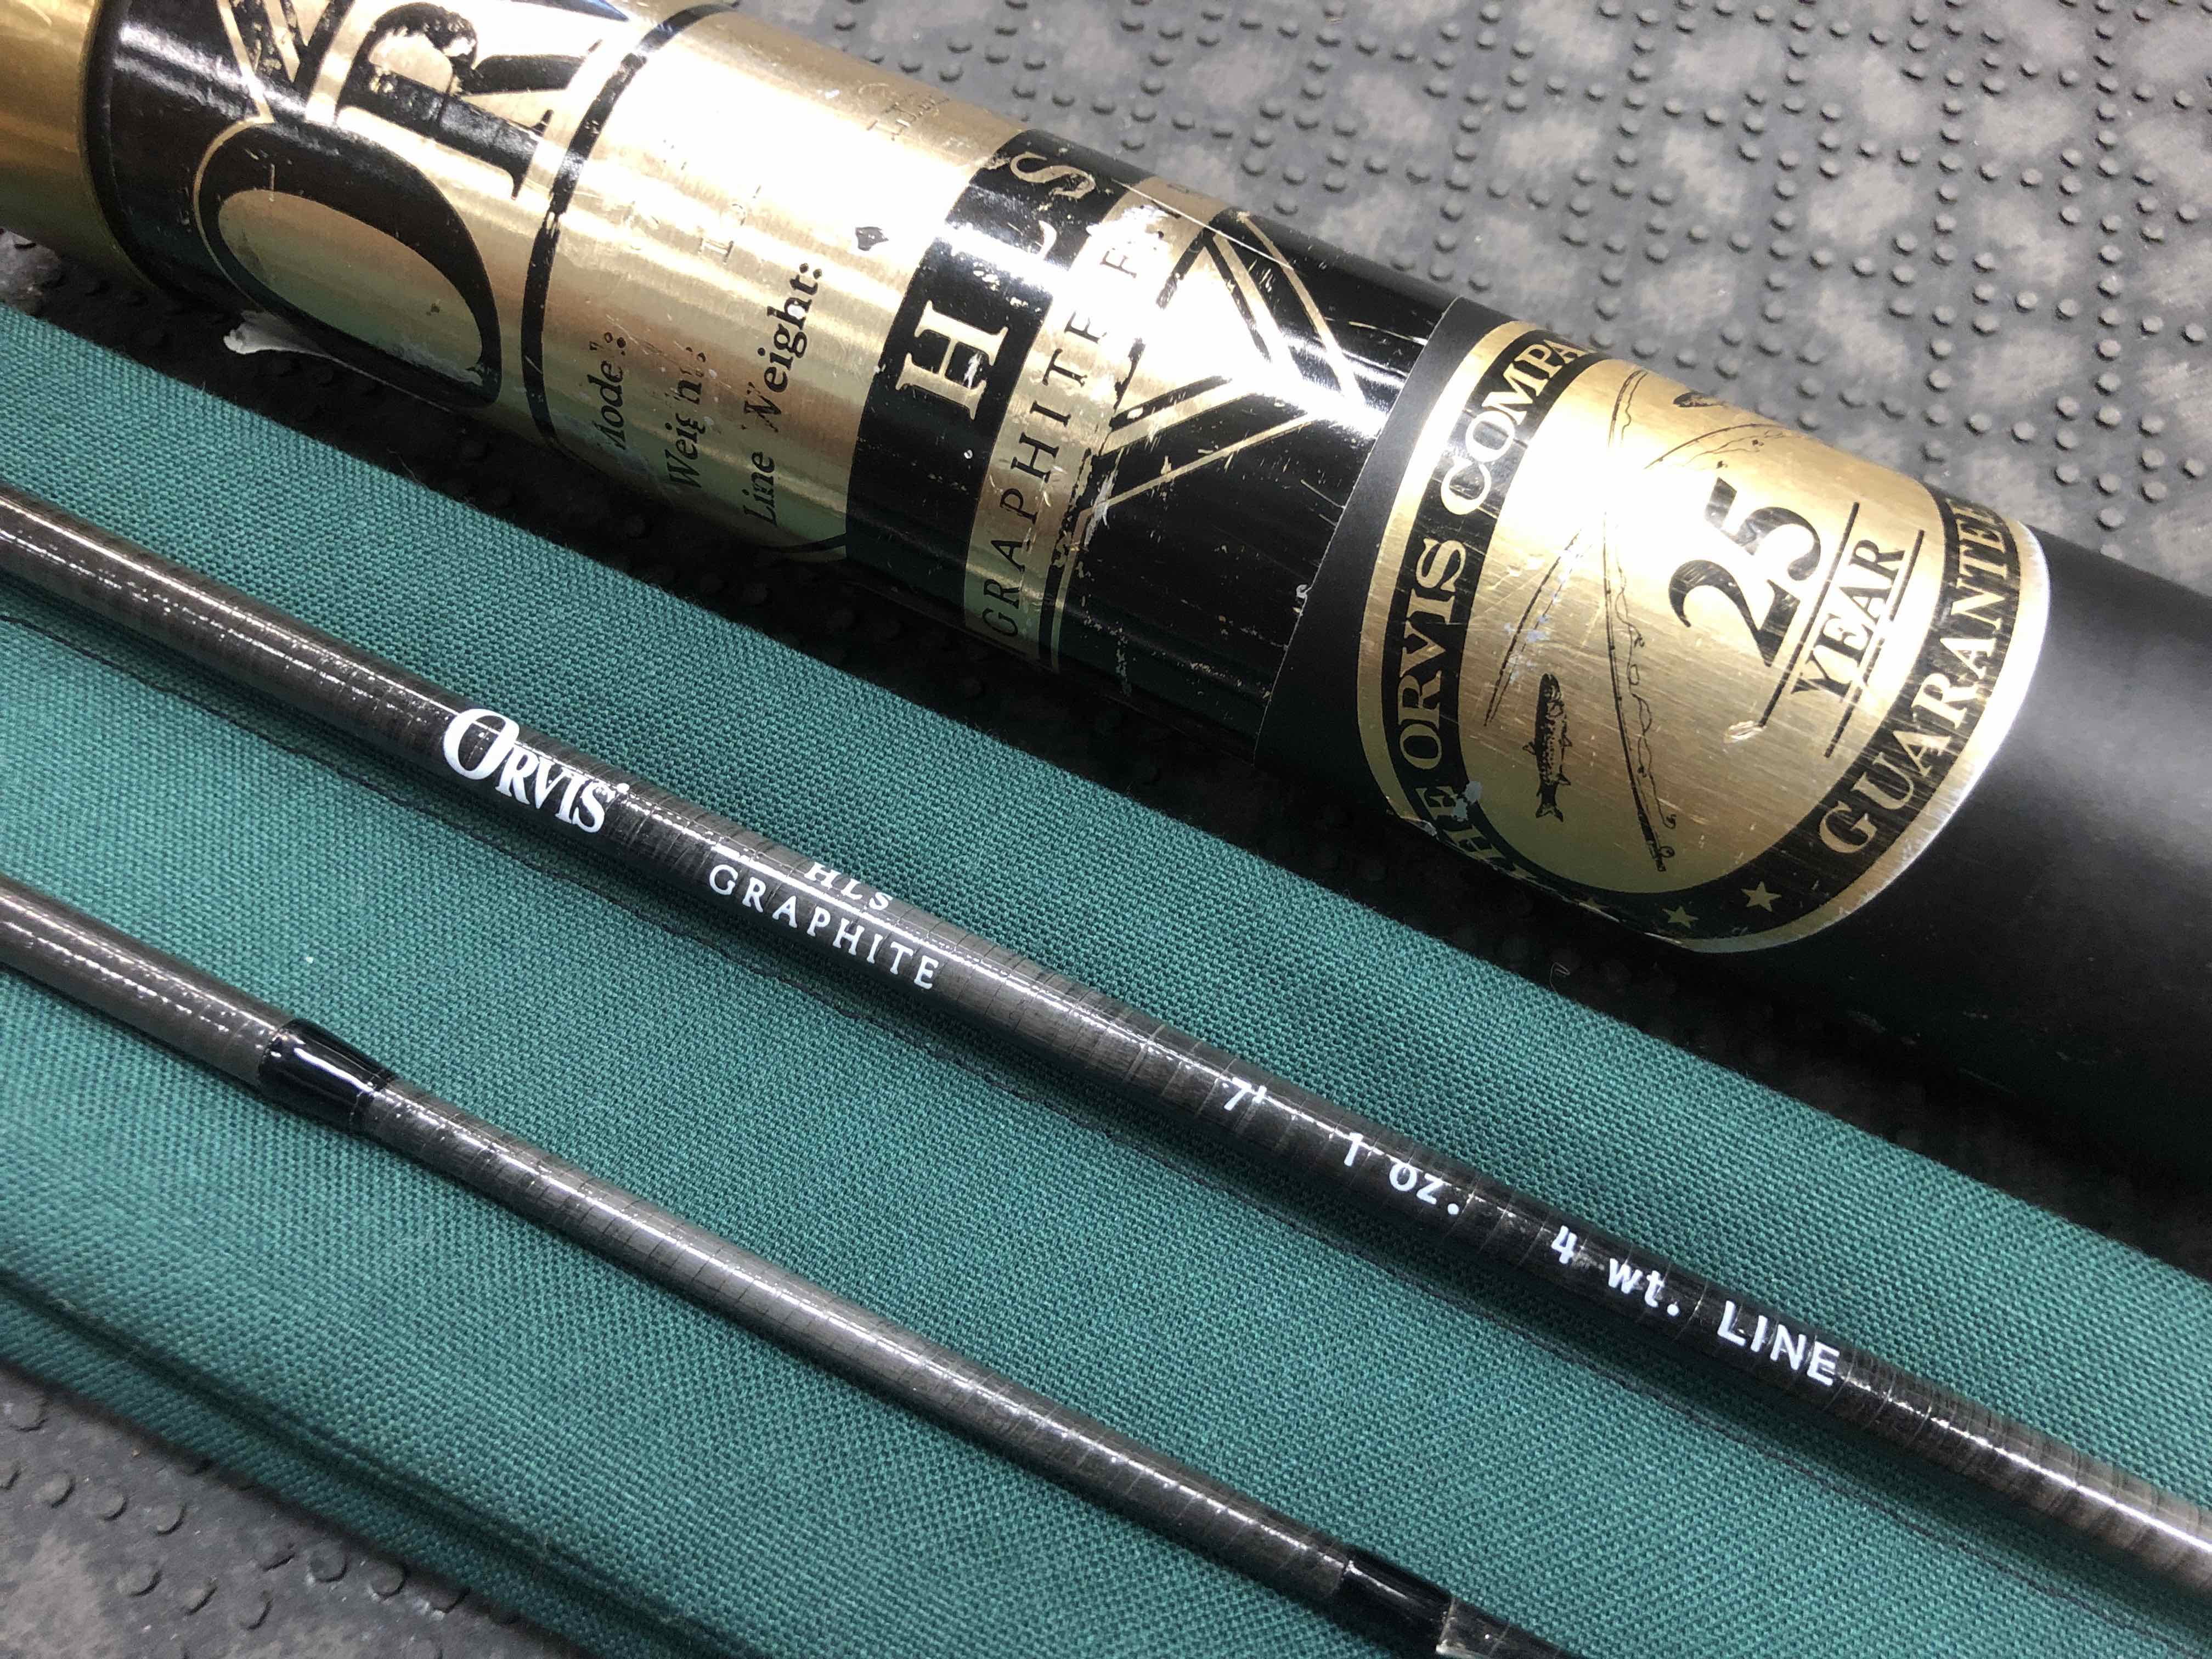 Orvis “Tippet” Graphite Fly Fishing Rod. 7' 6” 3wt. W/ Tube and Sock.